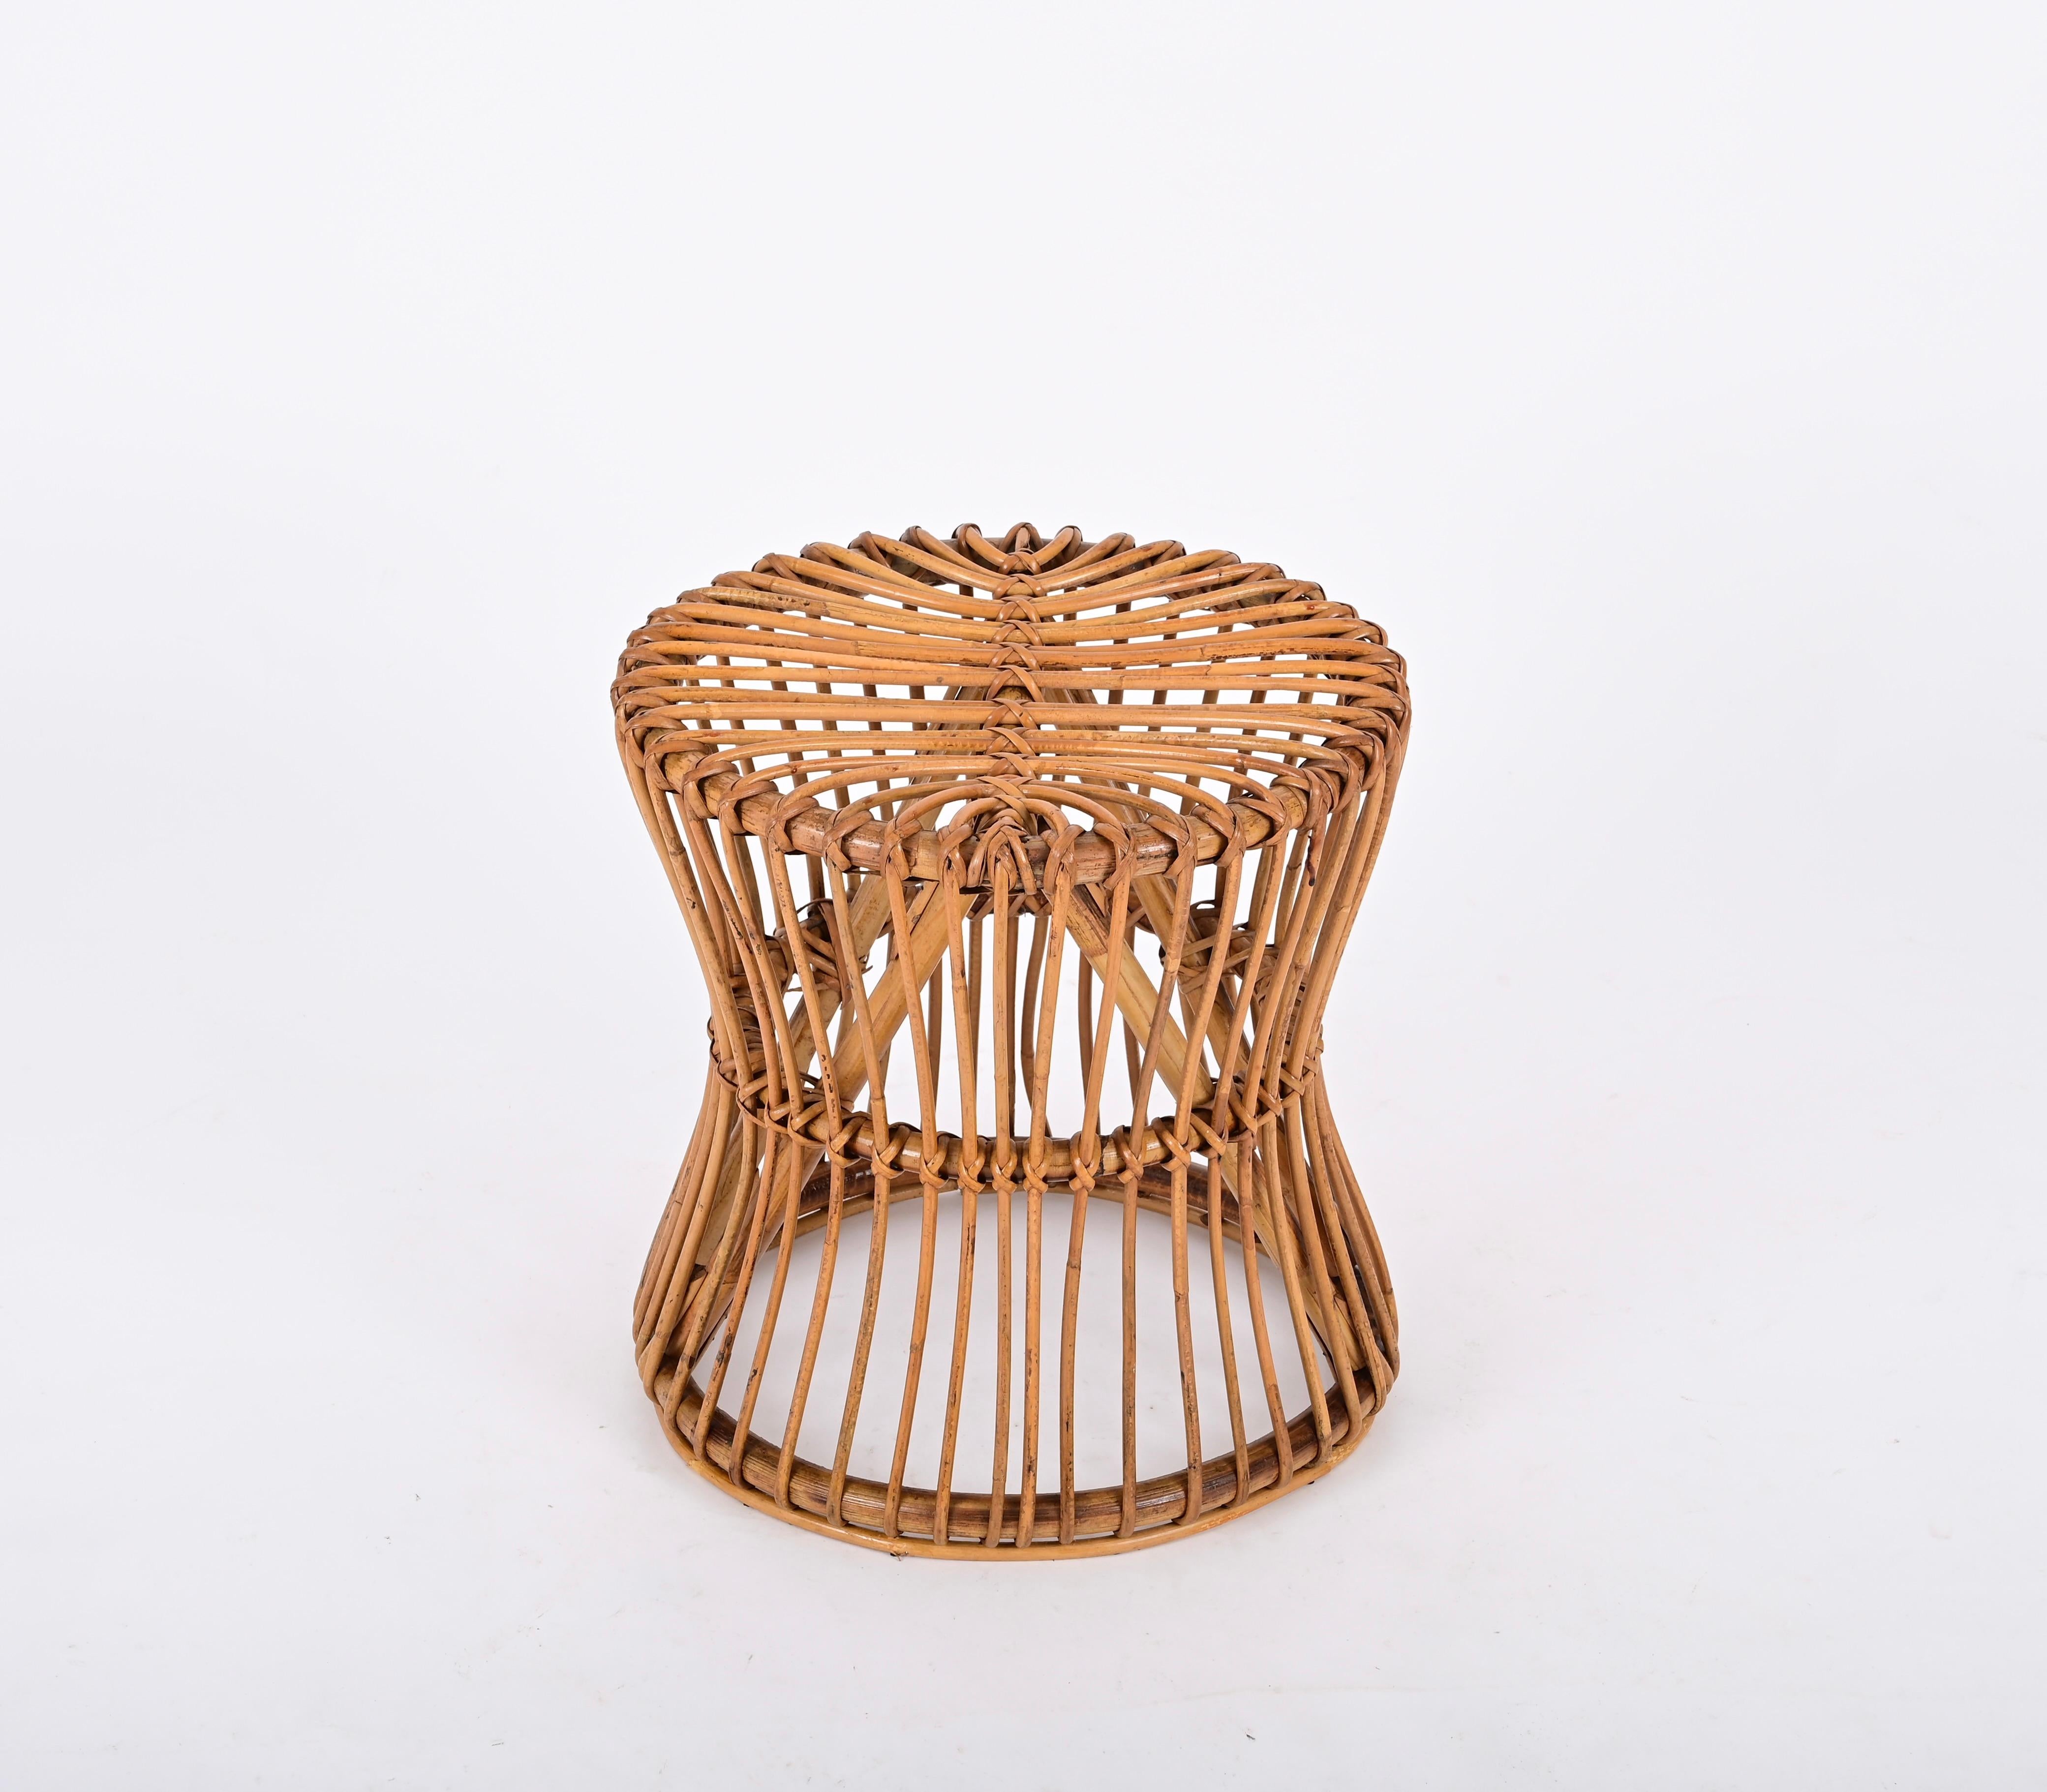 Italian Midcentury French Riviera Pouf Stool in Rattan and Woven Wicker, Italy, 1960s For Sale